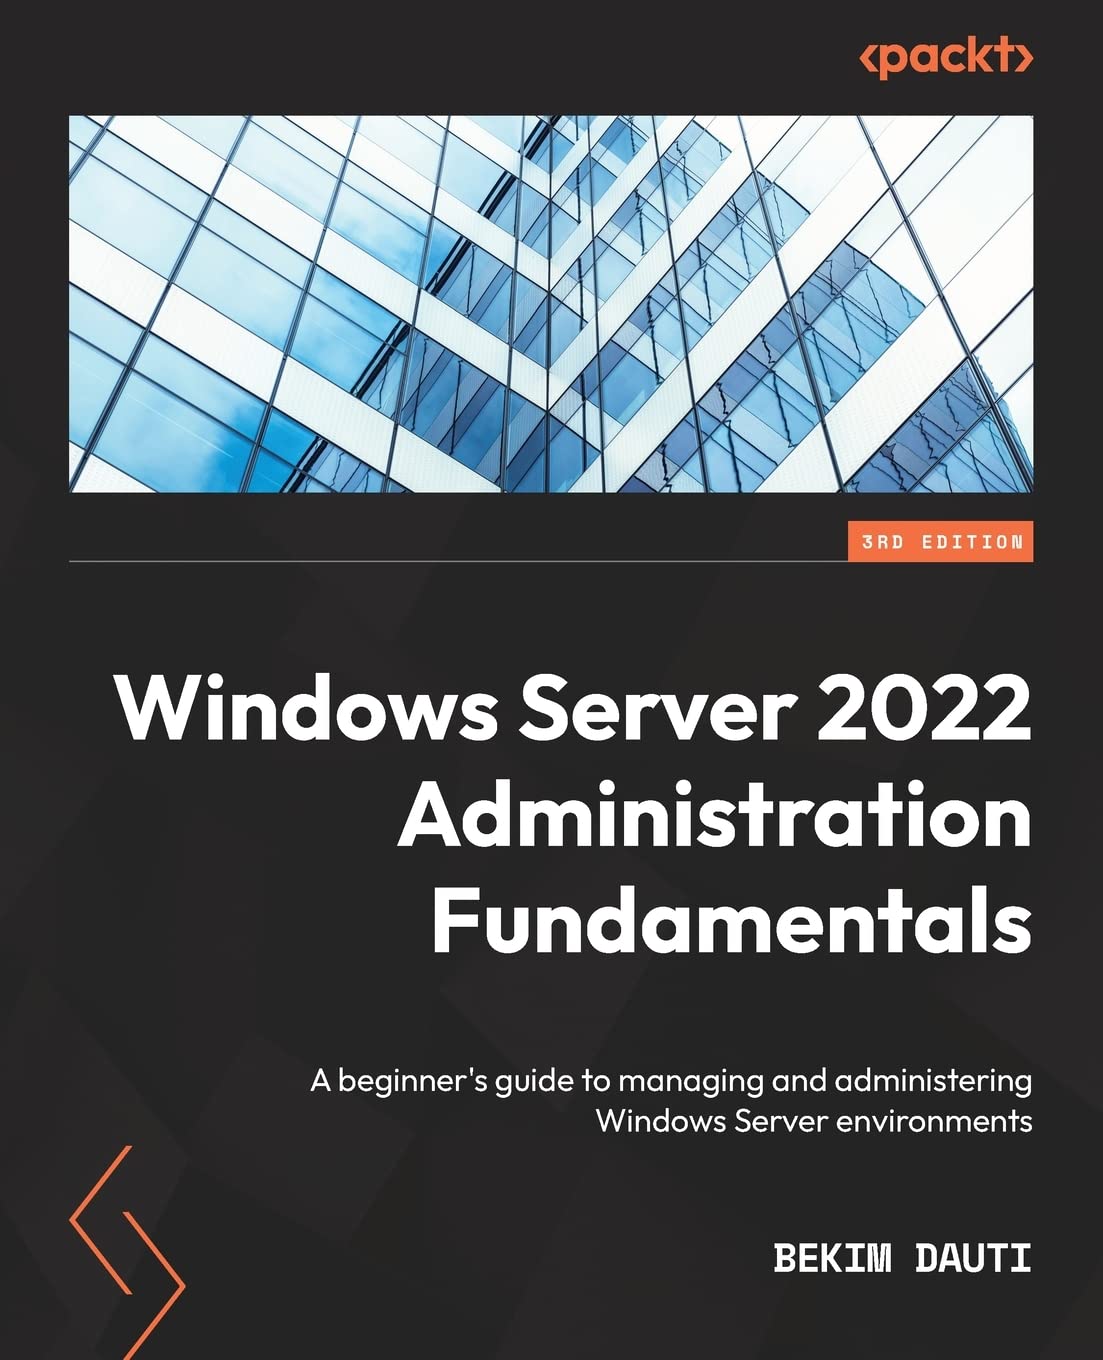 Windows Server 2022 Administration Fundamentals: A beginner's guide to managing and administering Windows Server environments, 3rd Edition